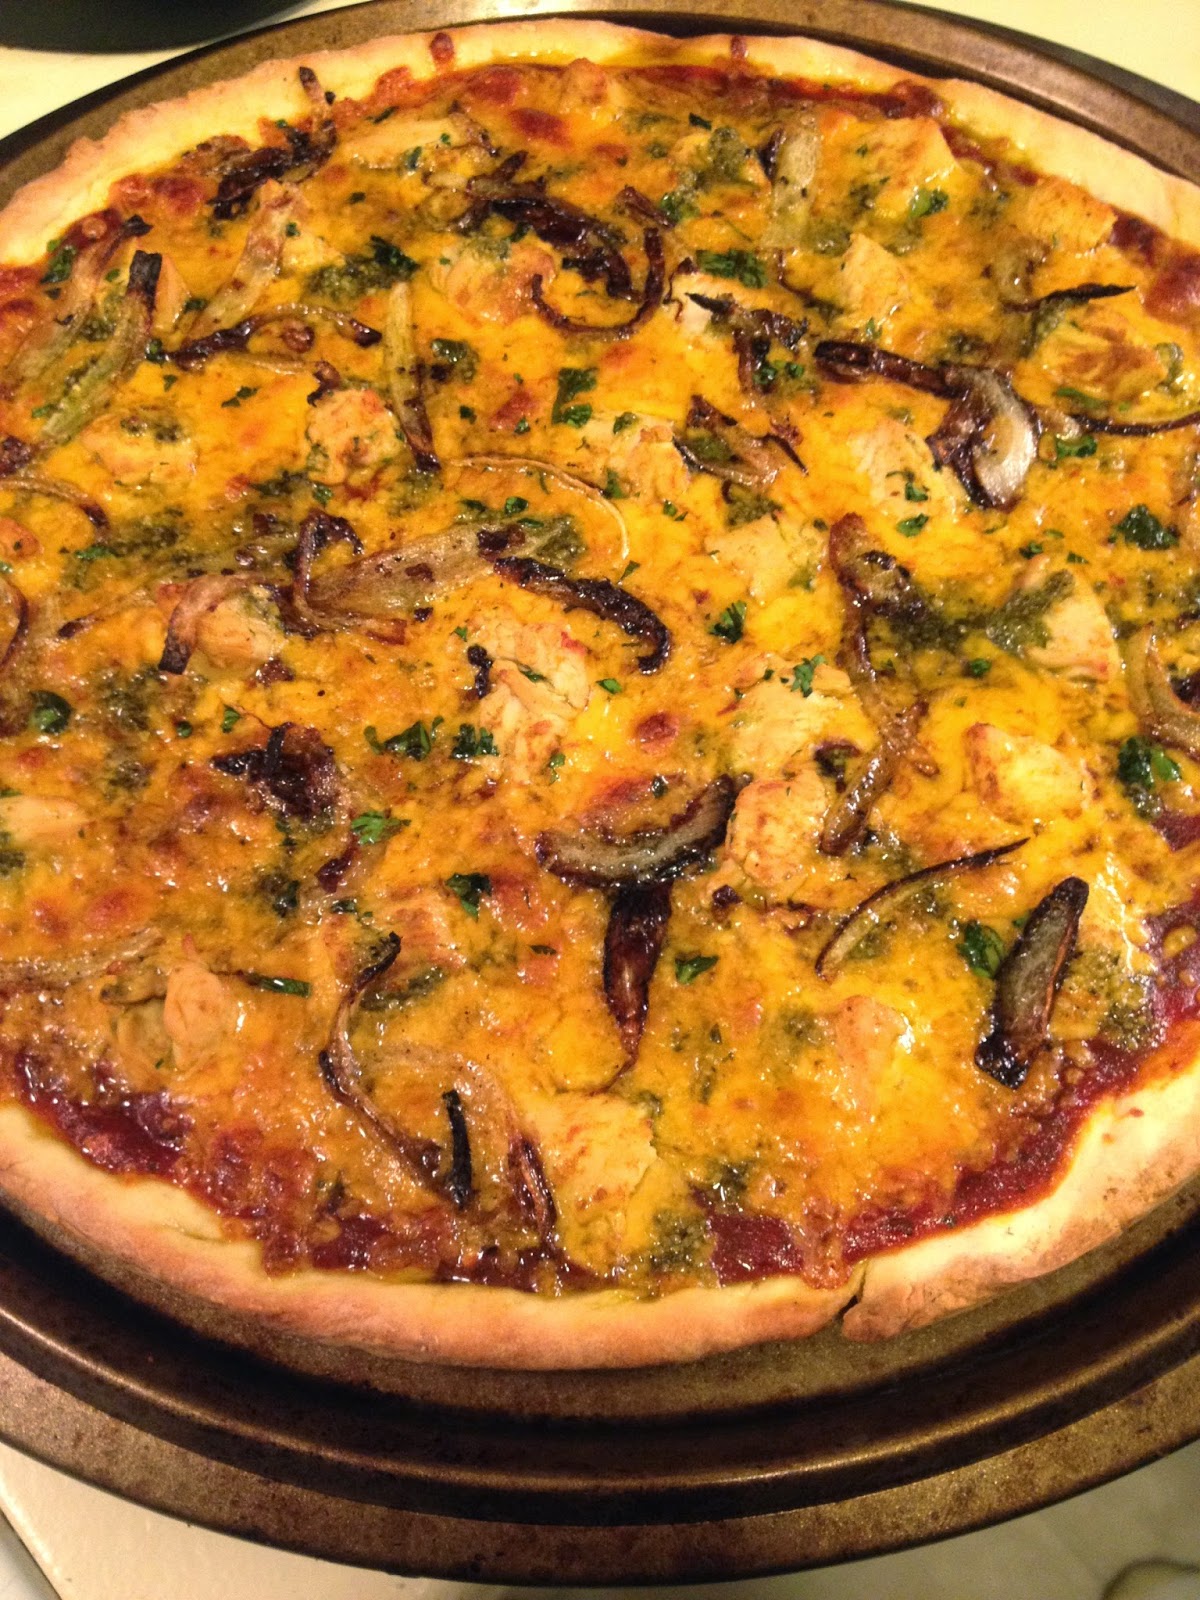 Indian Curry Pizza